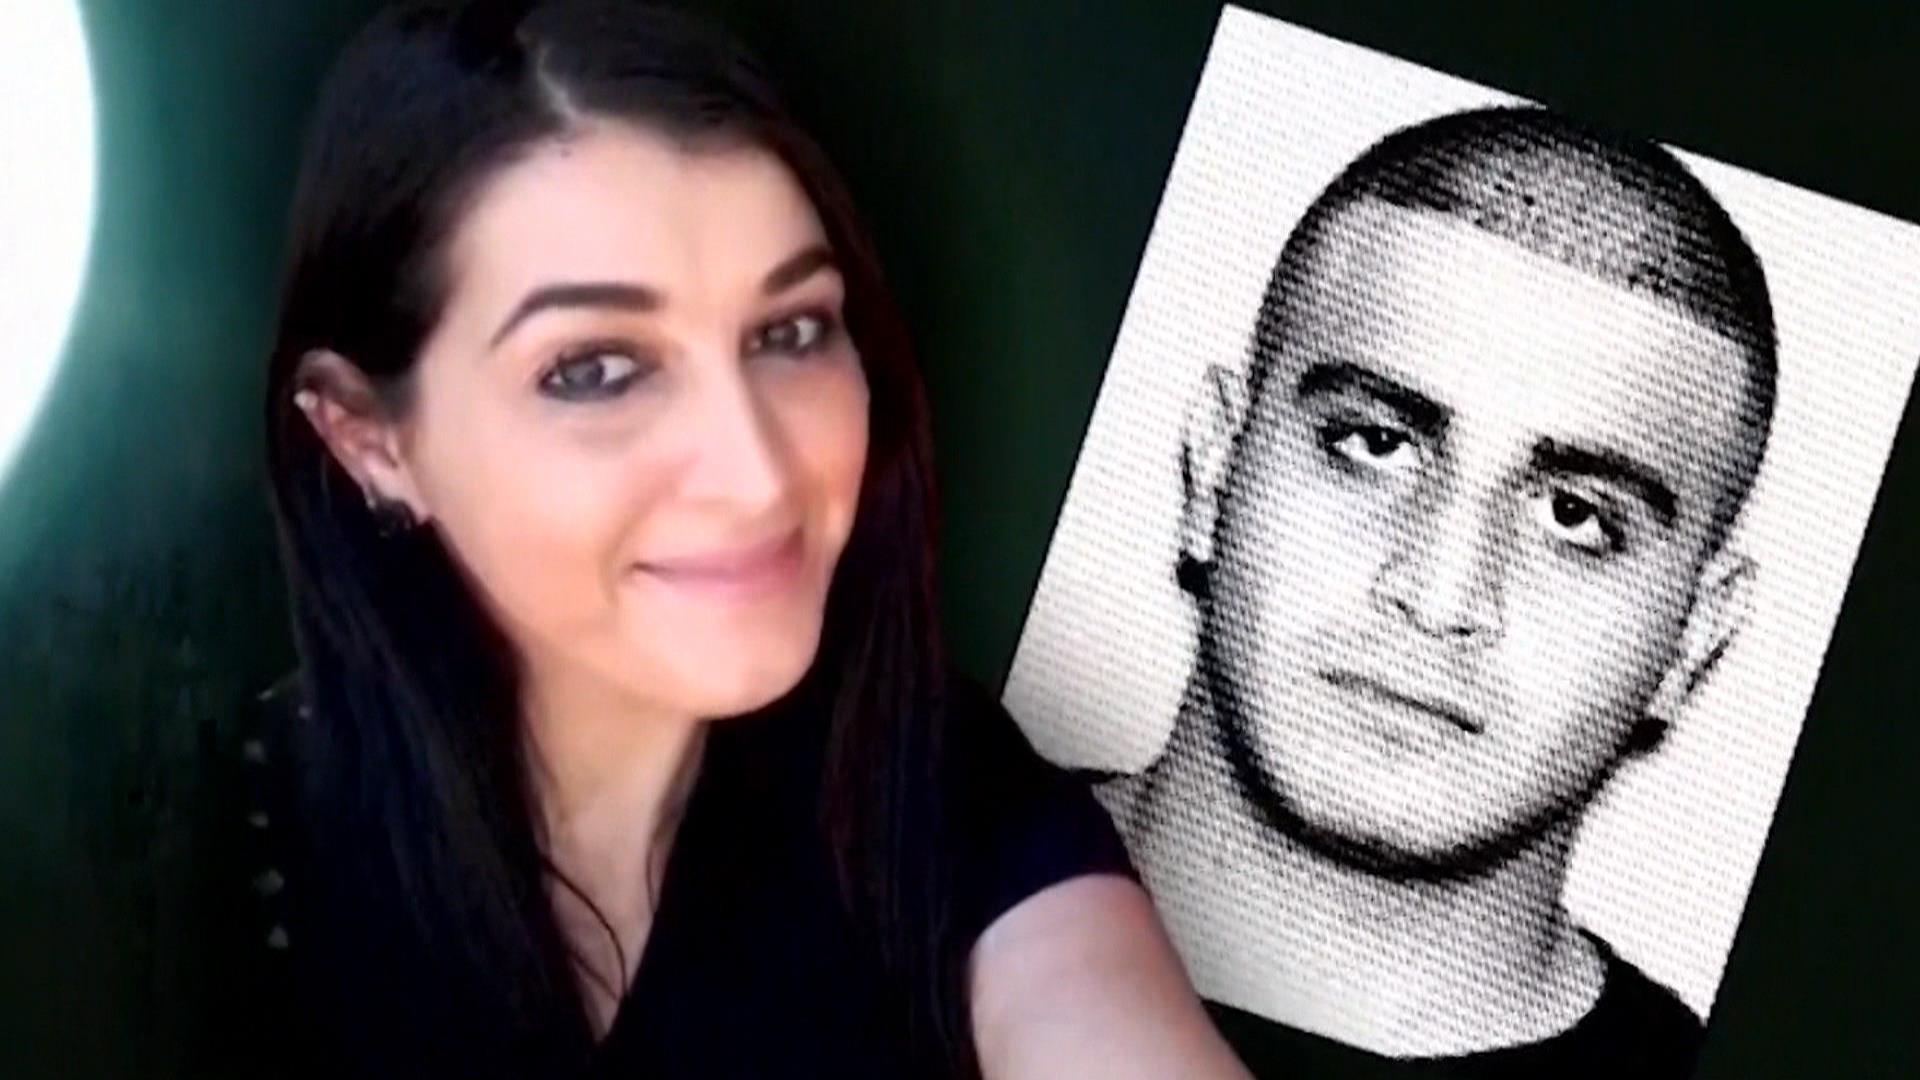 Wife of Pulse nightclub shooter Omar Mateen arrested in connection with attack